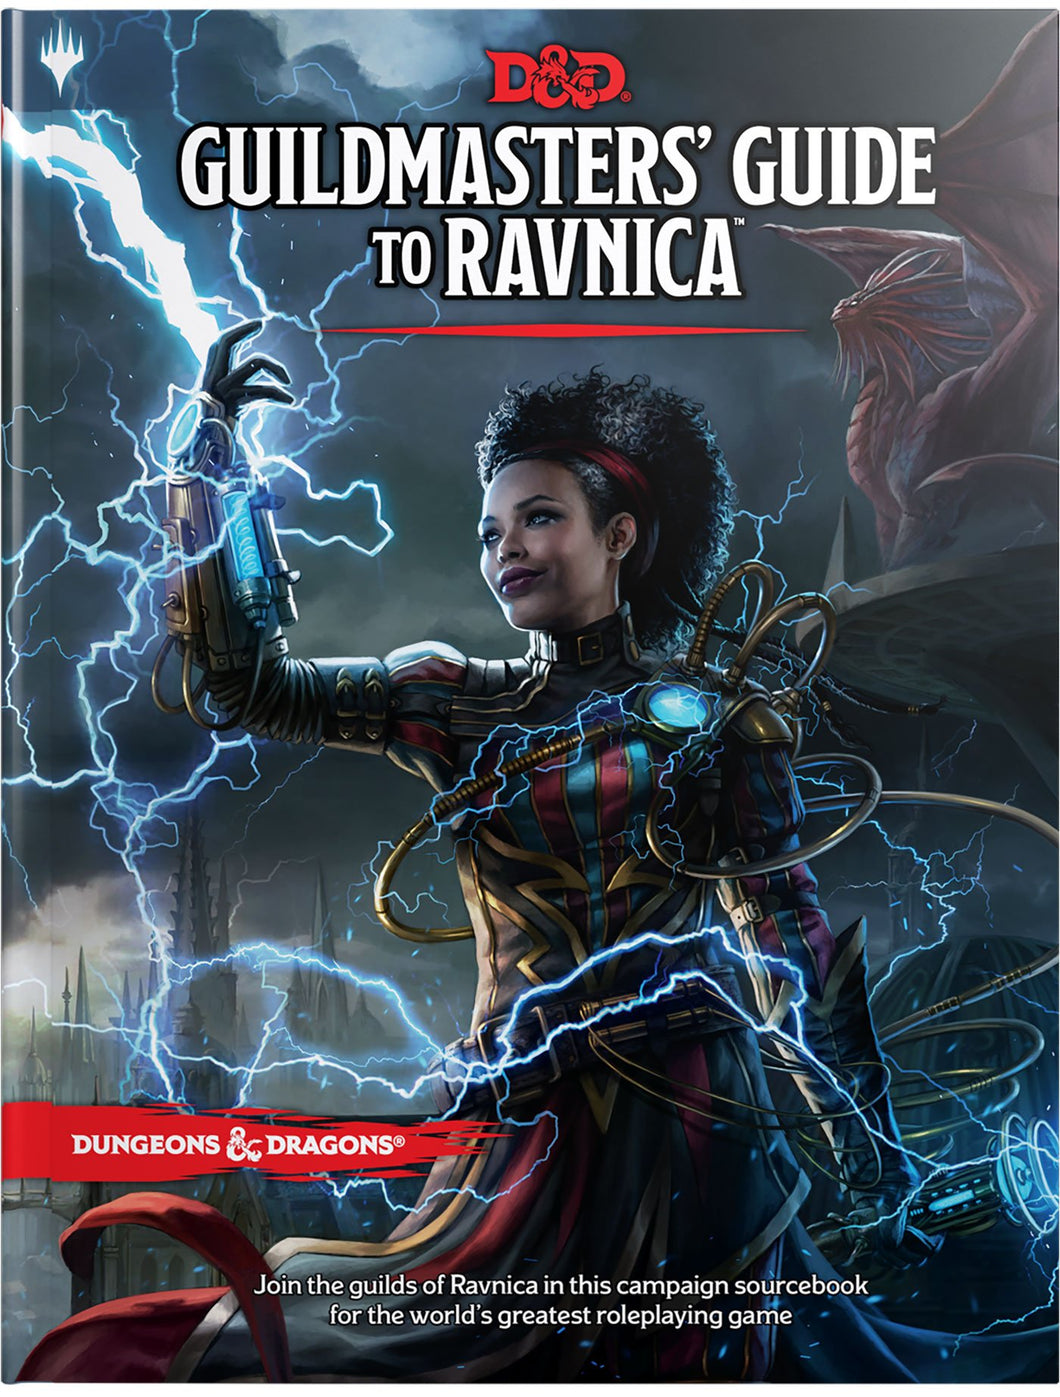 Dungeons & Dragons (D&D) : 5th Edition Guild Guide Ravnica Hc